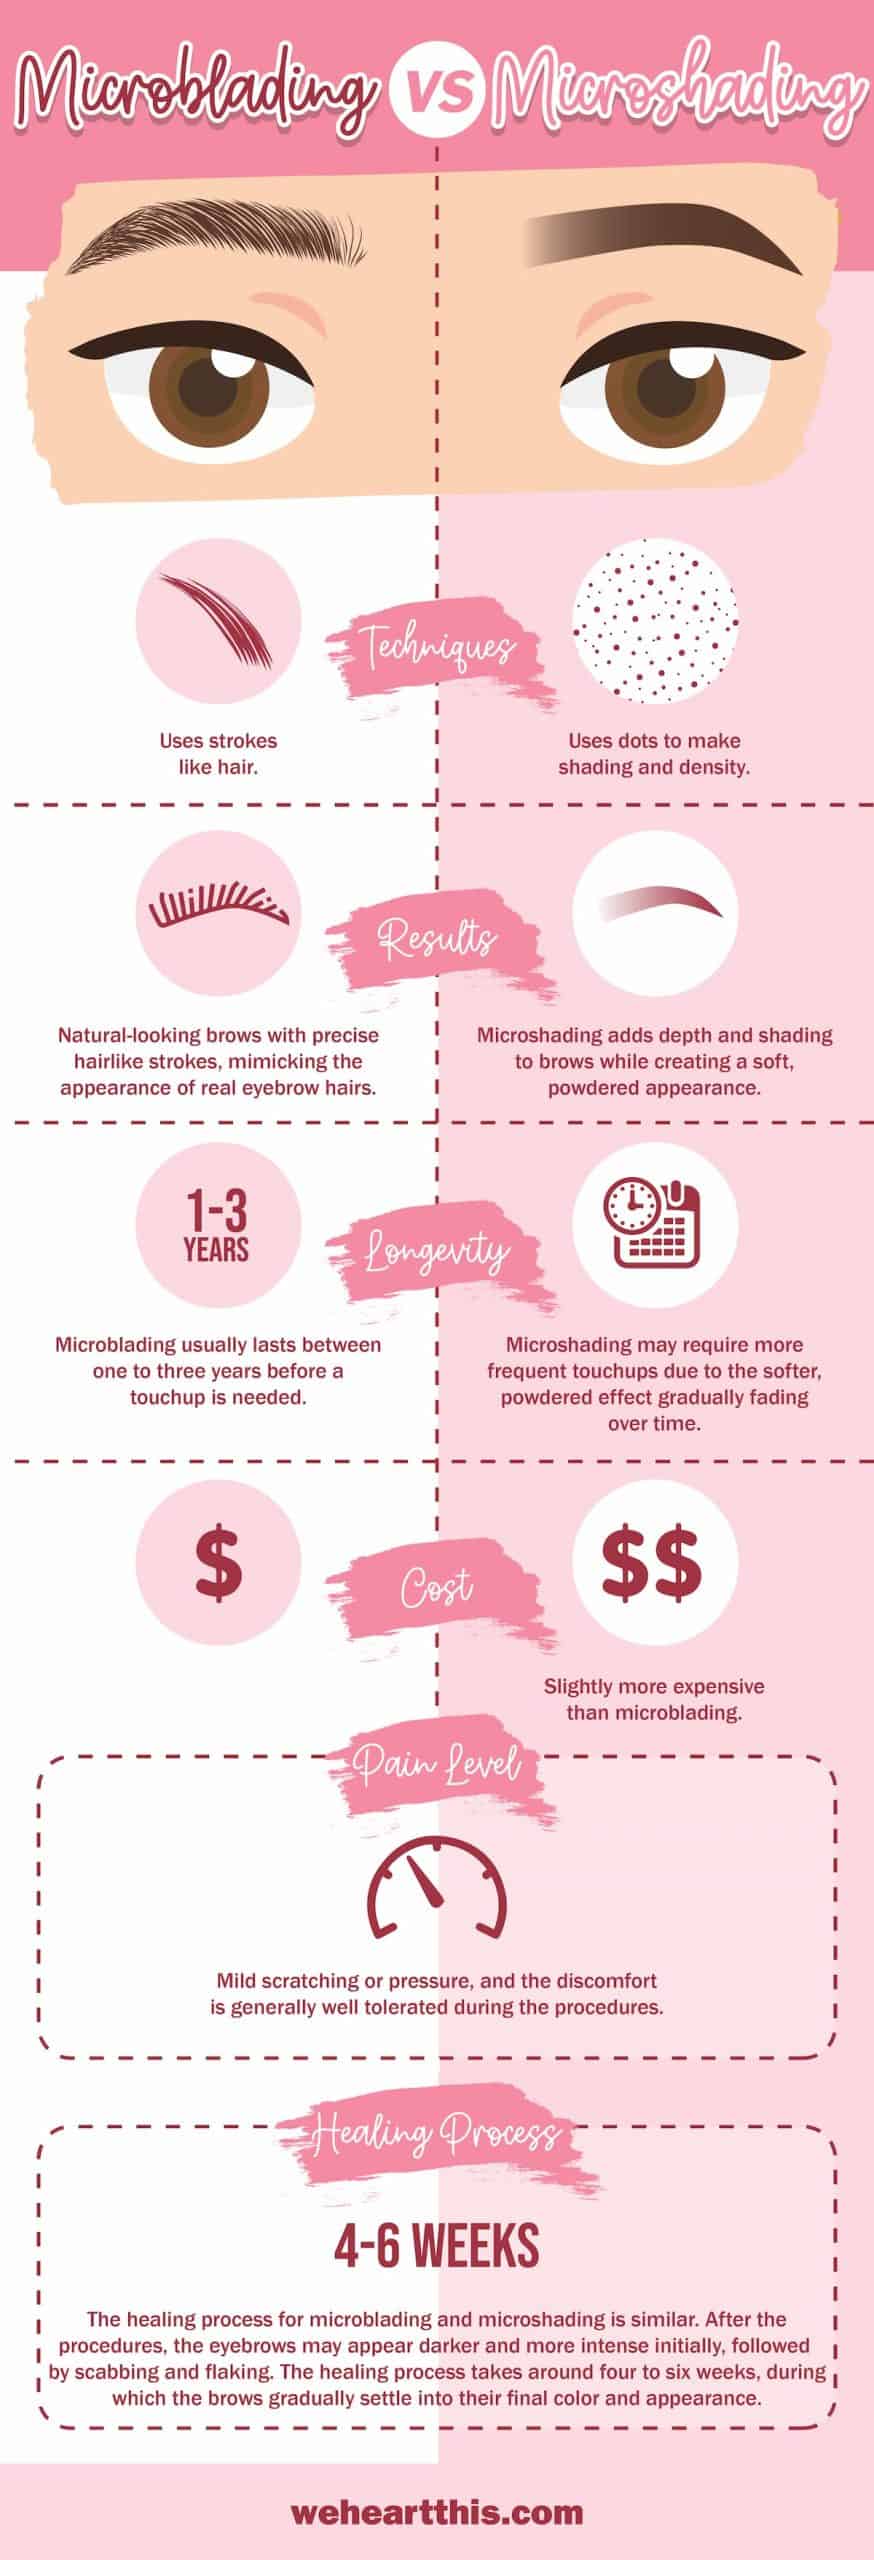 An infographic featuring microblading vs microshading with their different description about techniques, results, longevity, cost, pain level and healing process